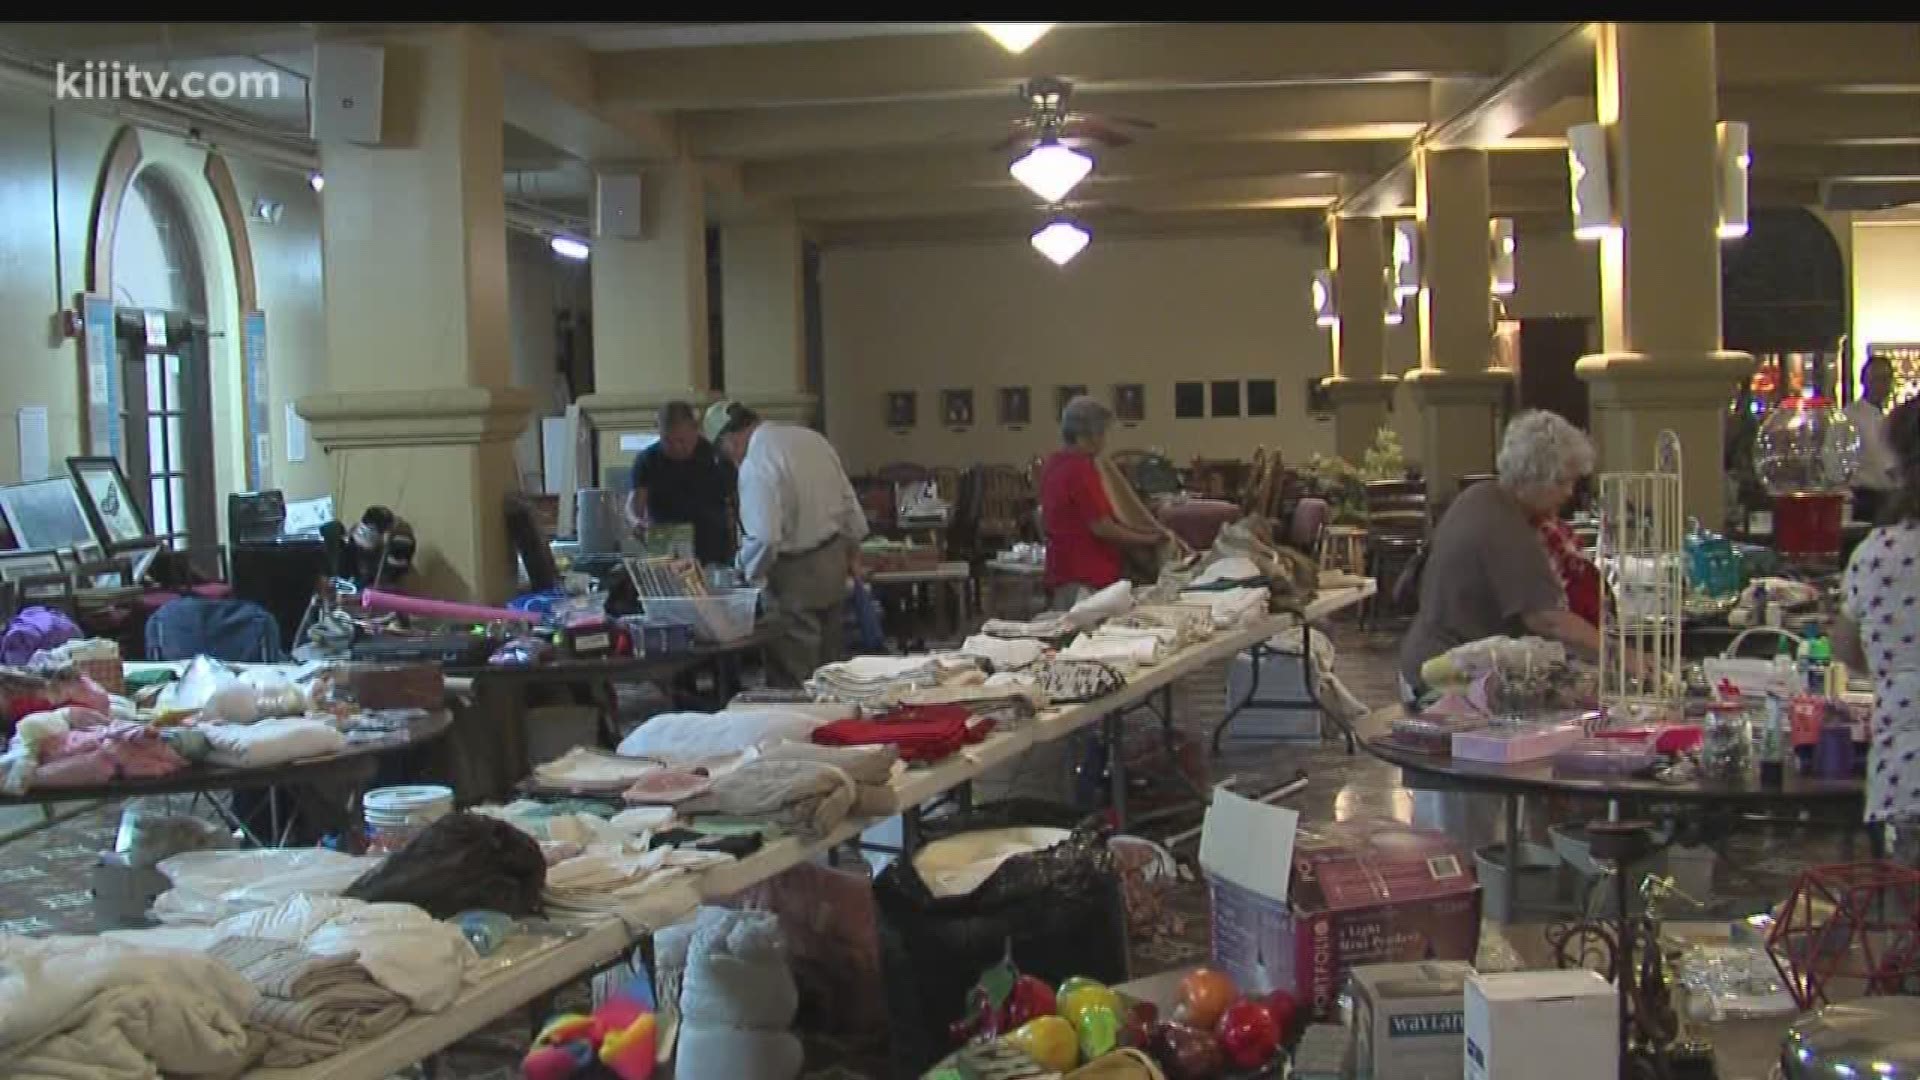 The annual rummage sale at the Corpus Christi Cathedral is back this weekend, giving you the chance to find great pieces of furniture, home appliances, toys, sporting goods and more at affordable prices.